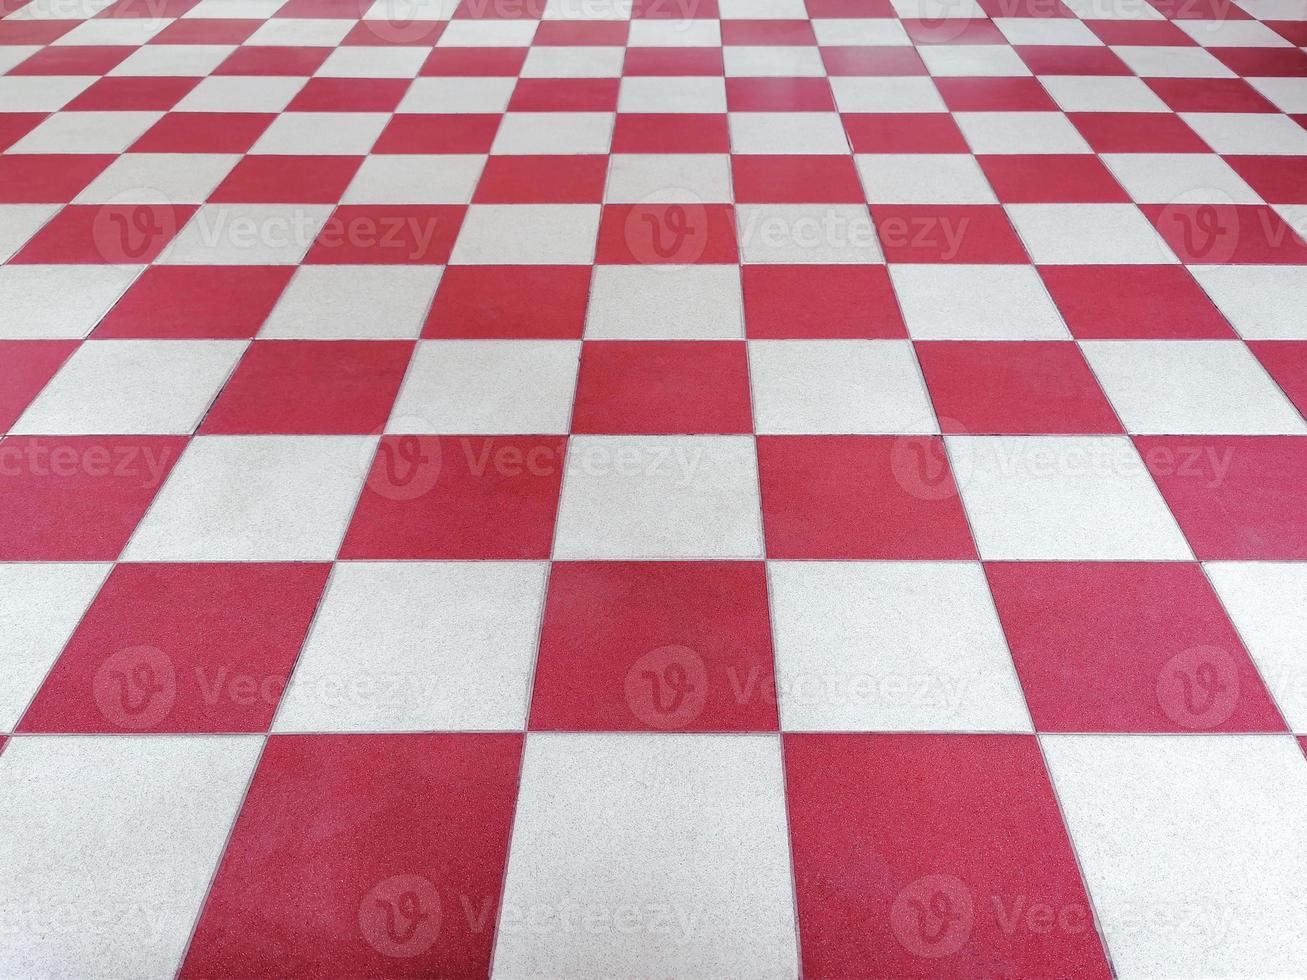 Red and white tiled floor symmetrical with grid texture in perspective view for background.Permanent tiled floor. red white square Made of floor ceramic material photo